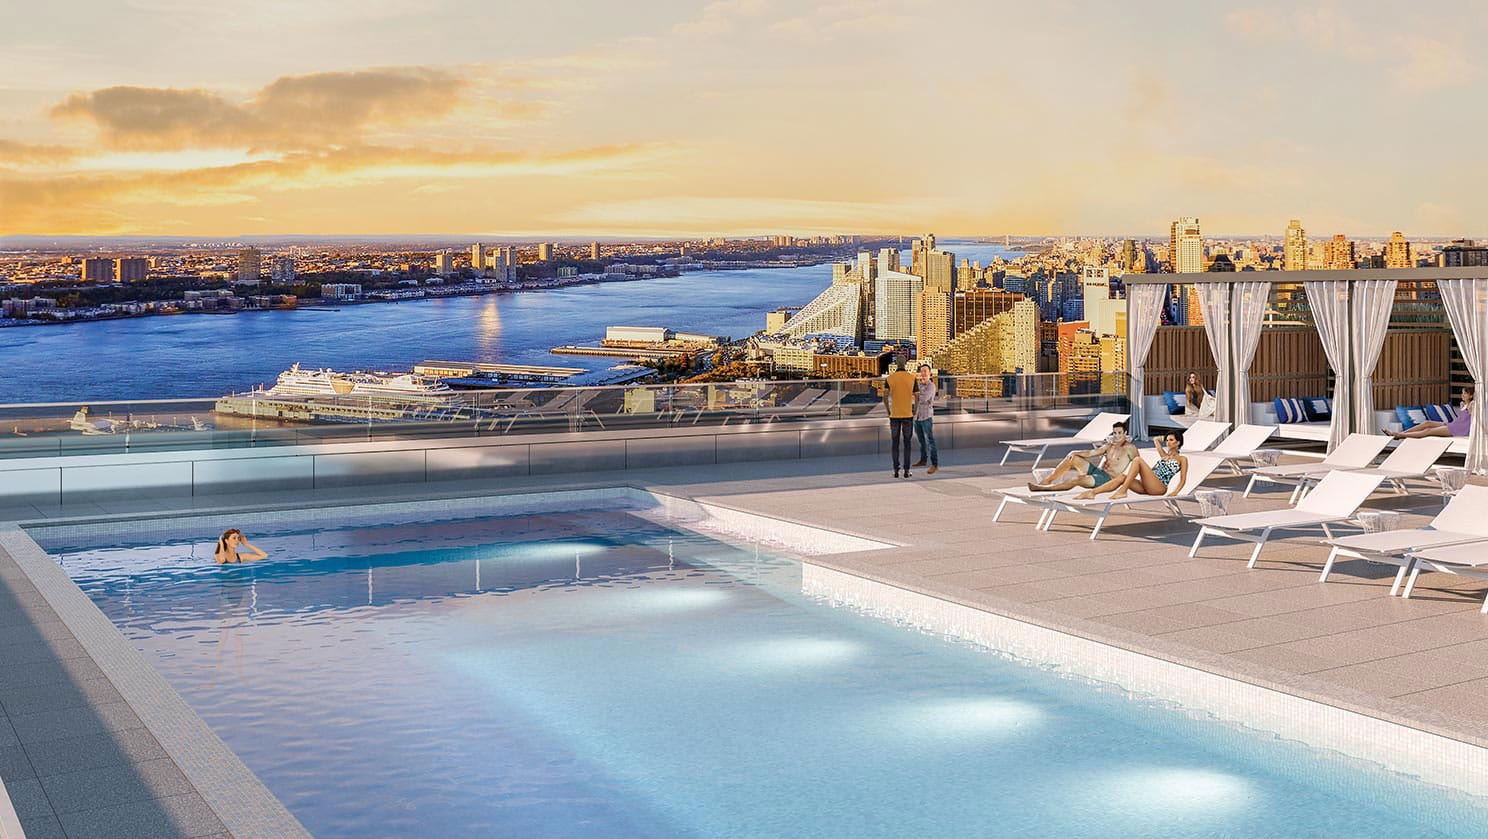 Affordable housing in new York: apartments in Hudson Yards from $613